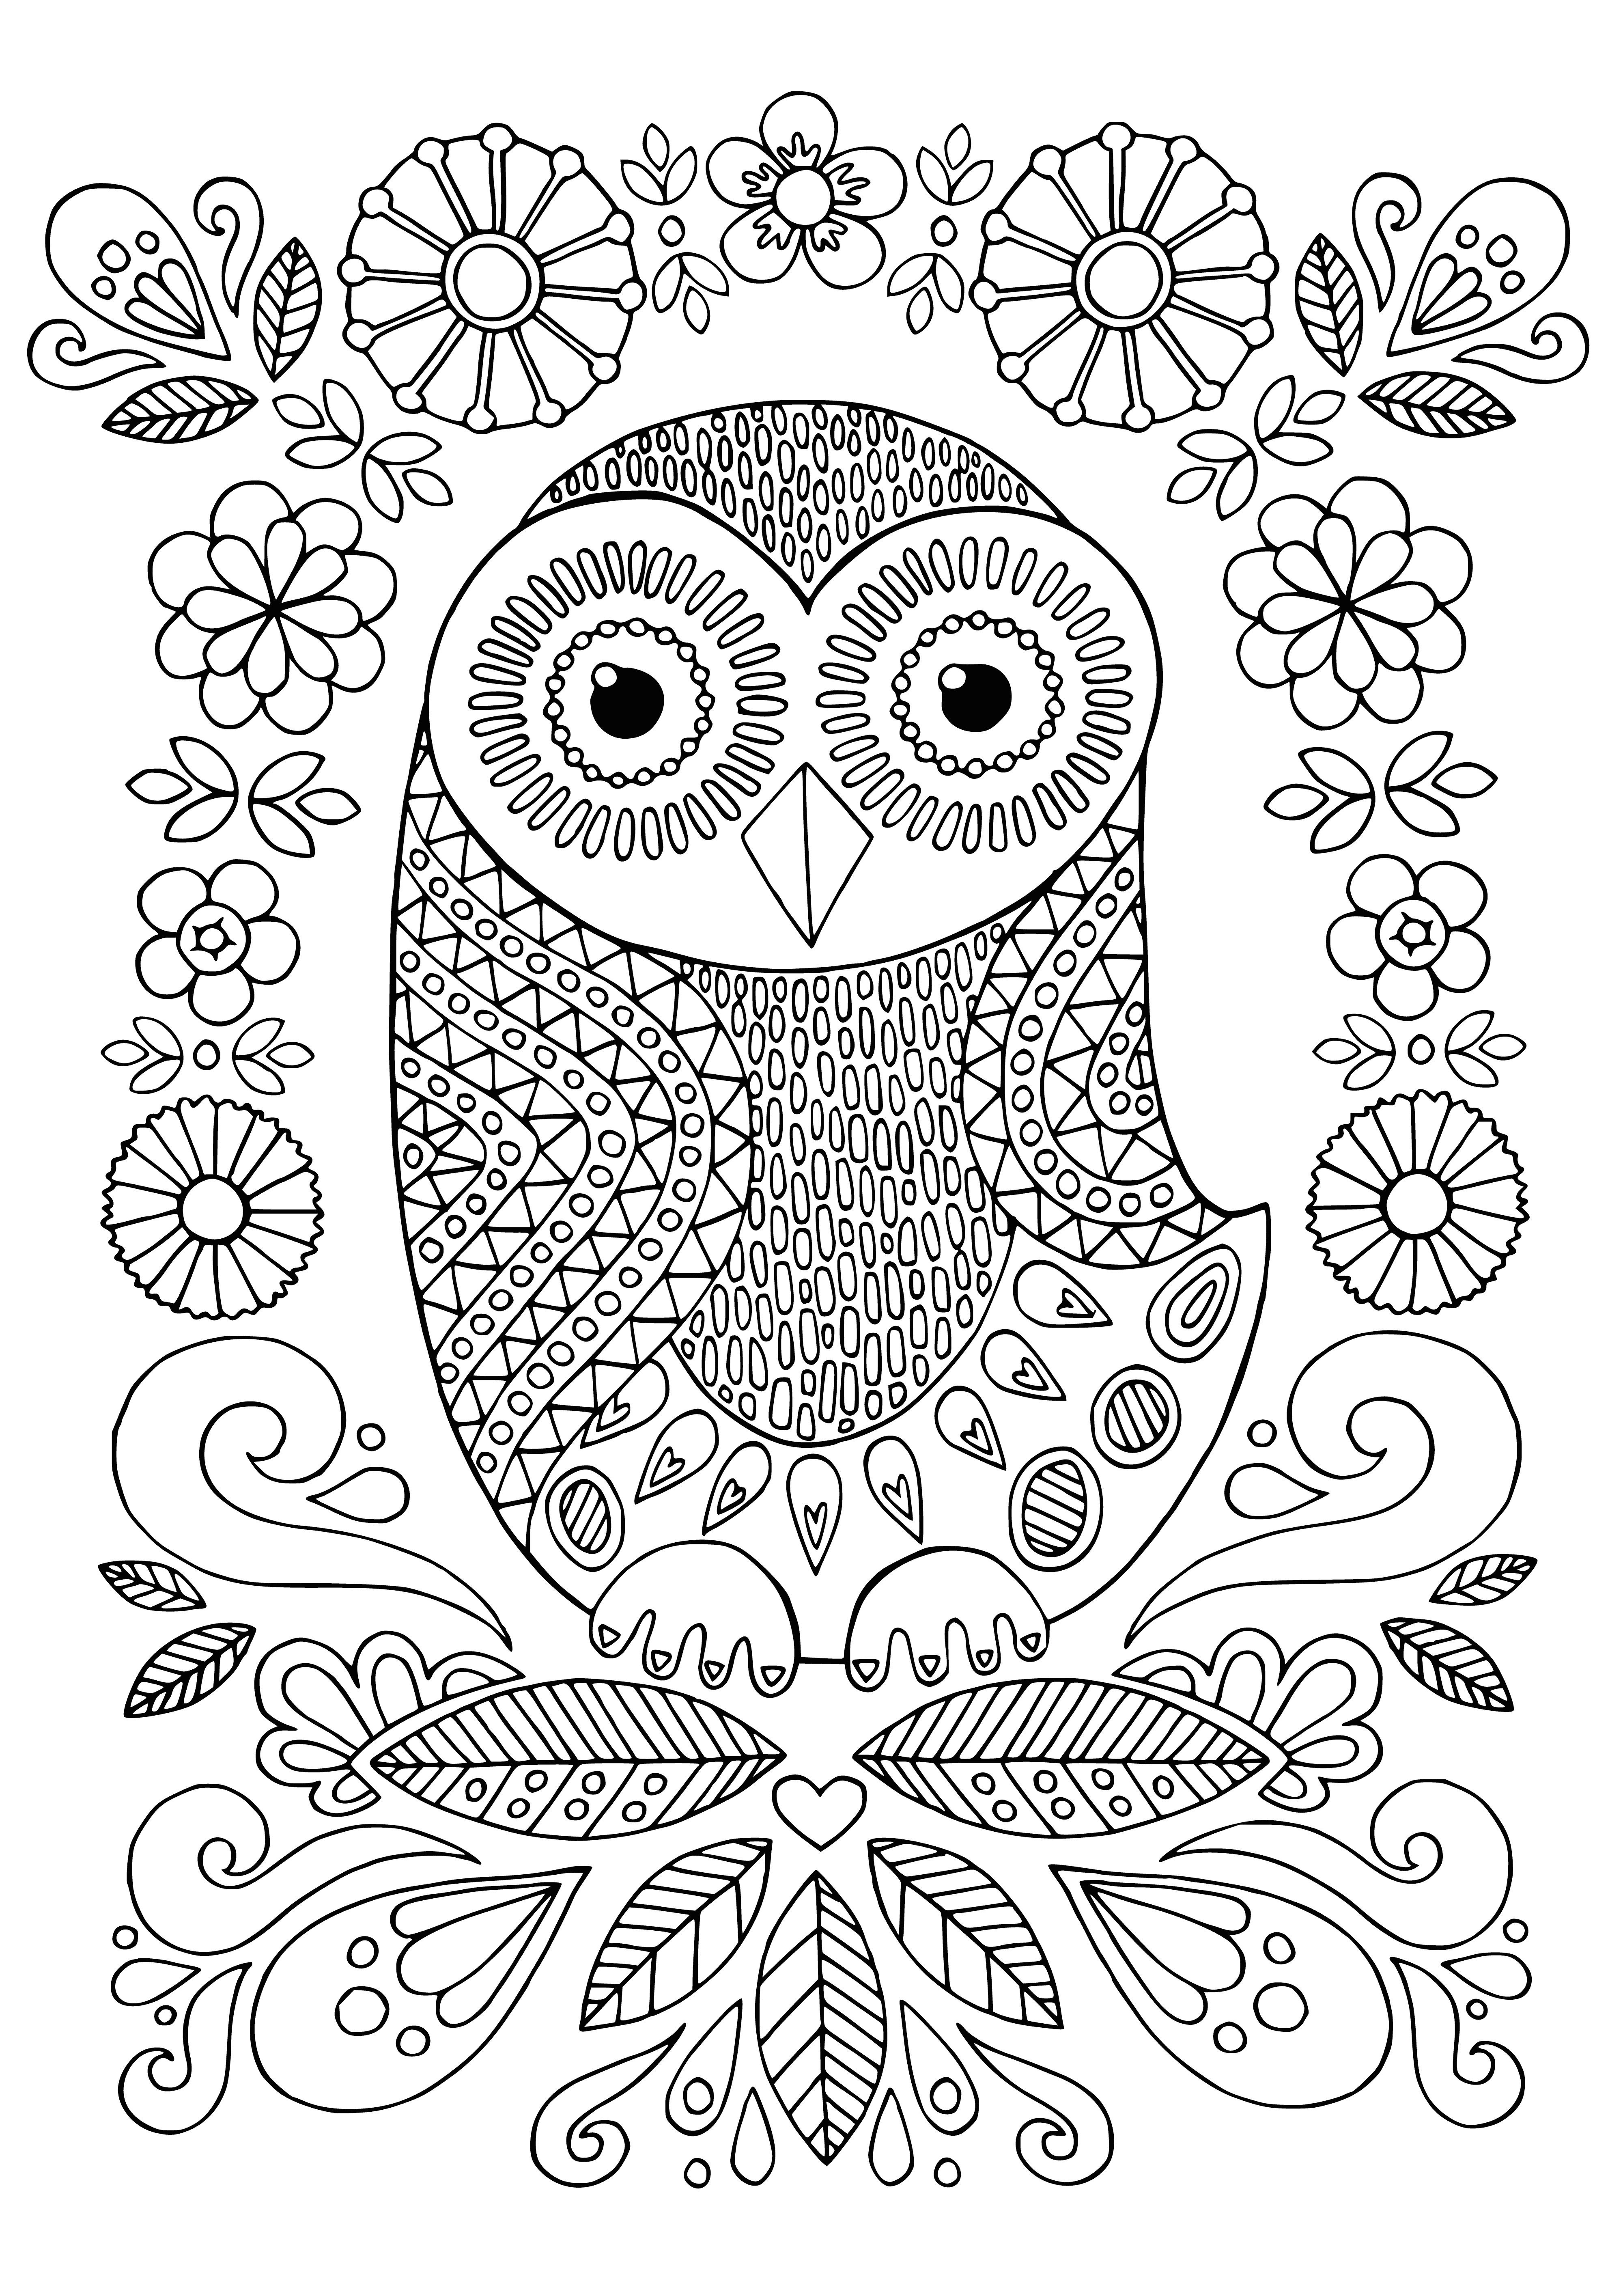 Owl coloring page